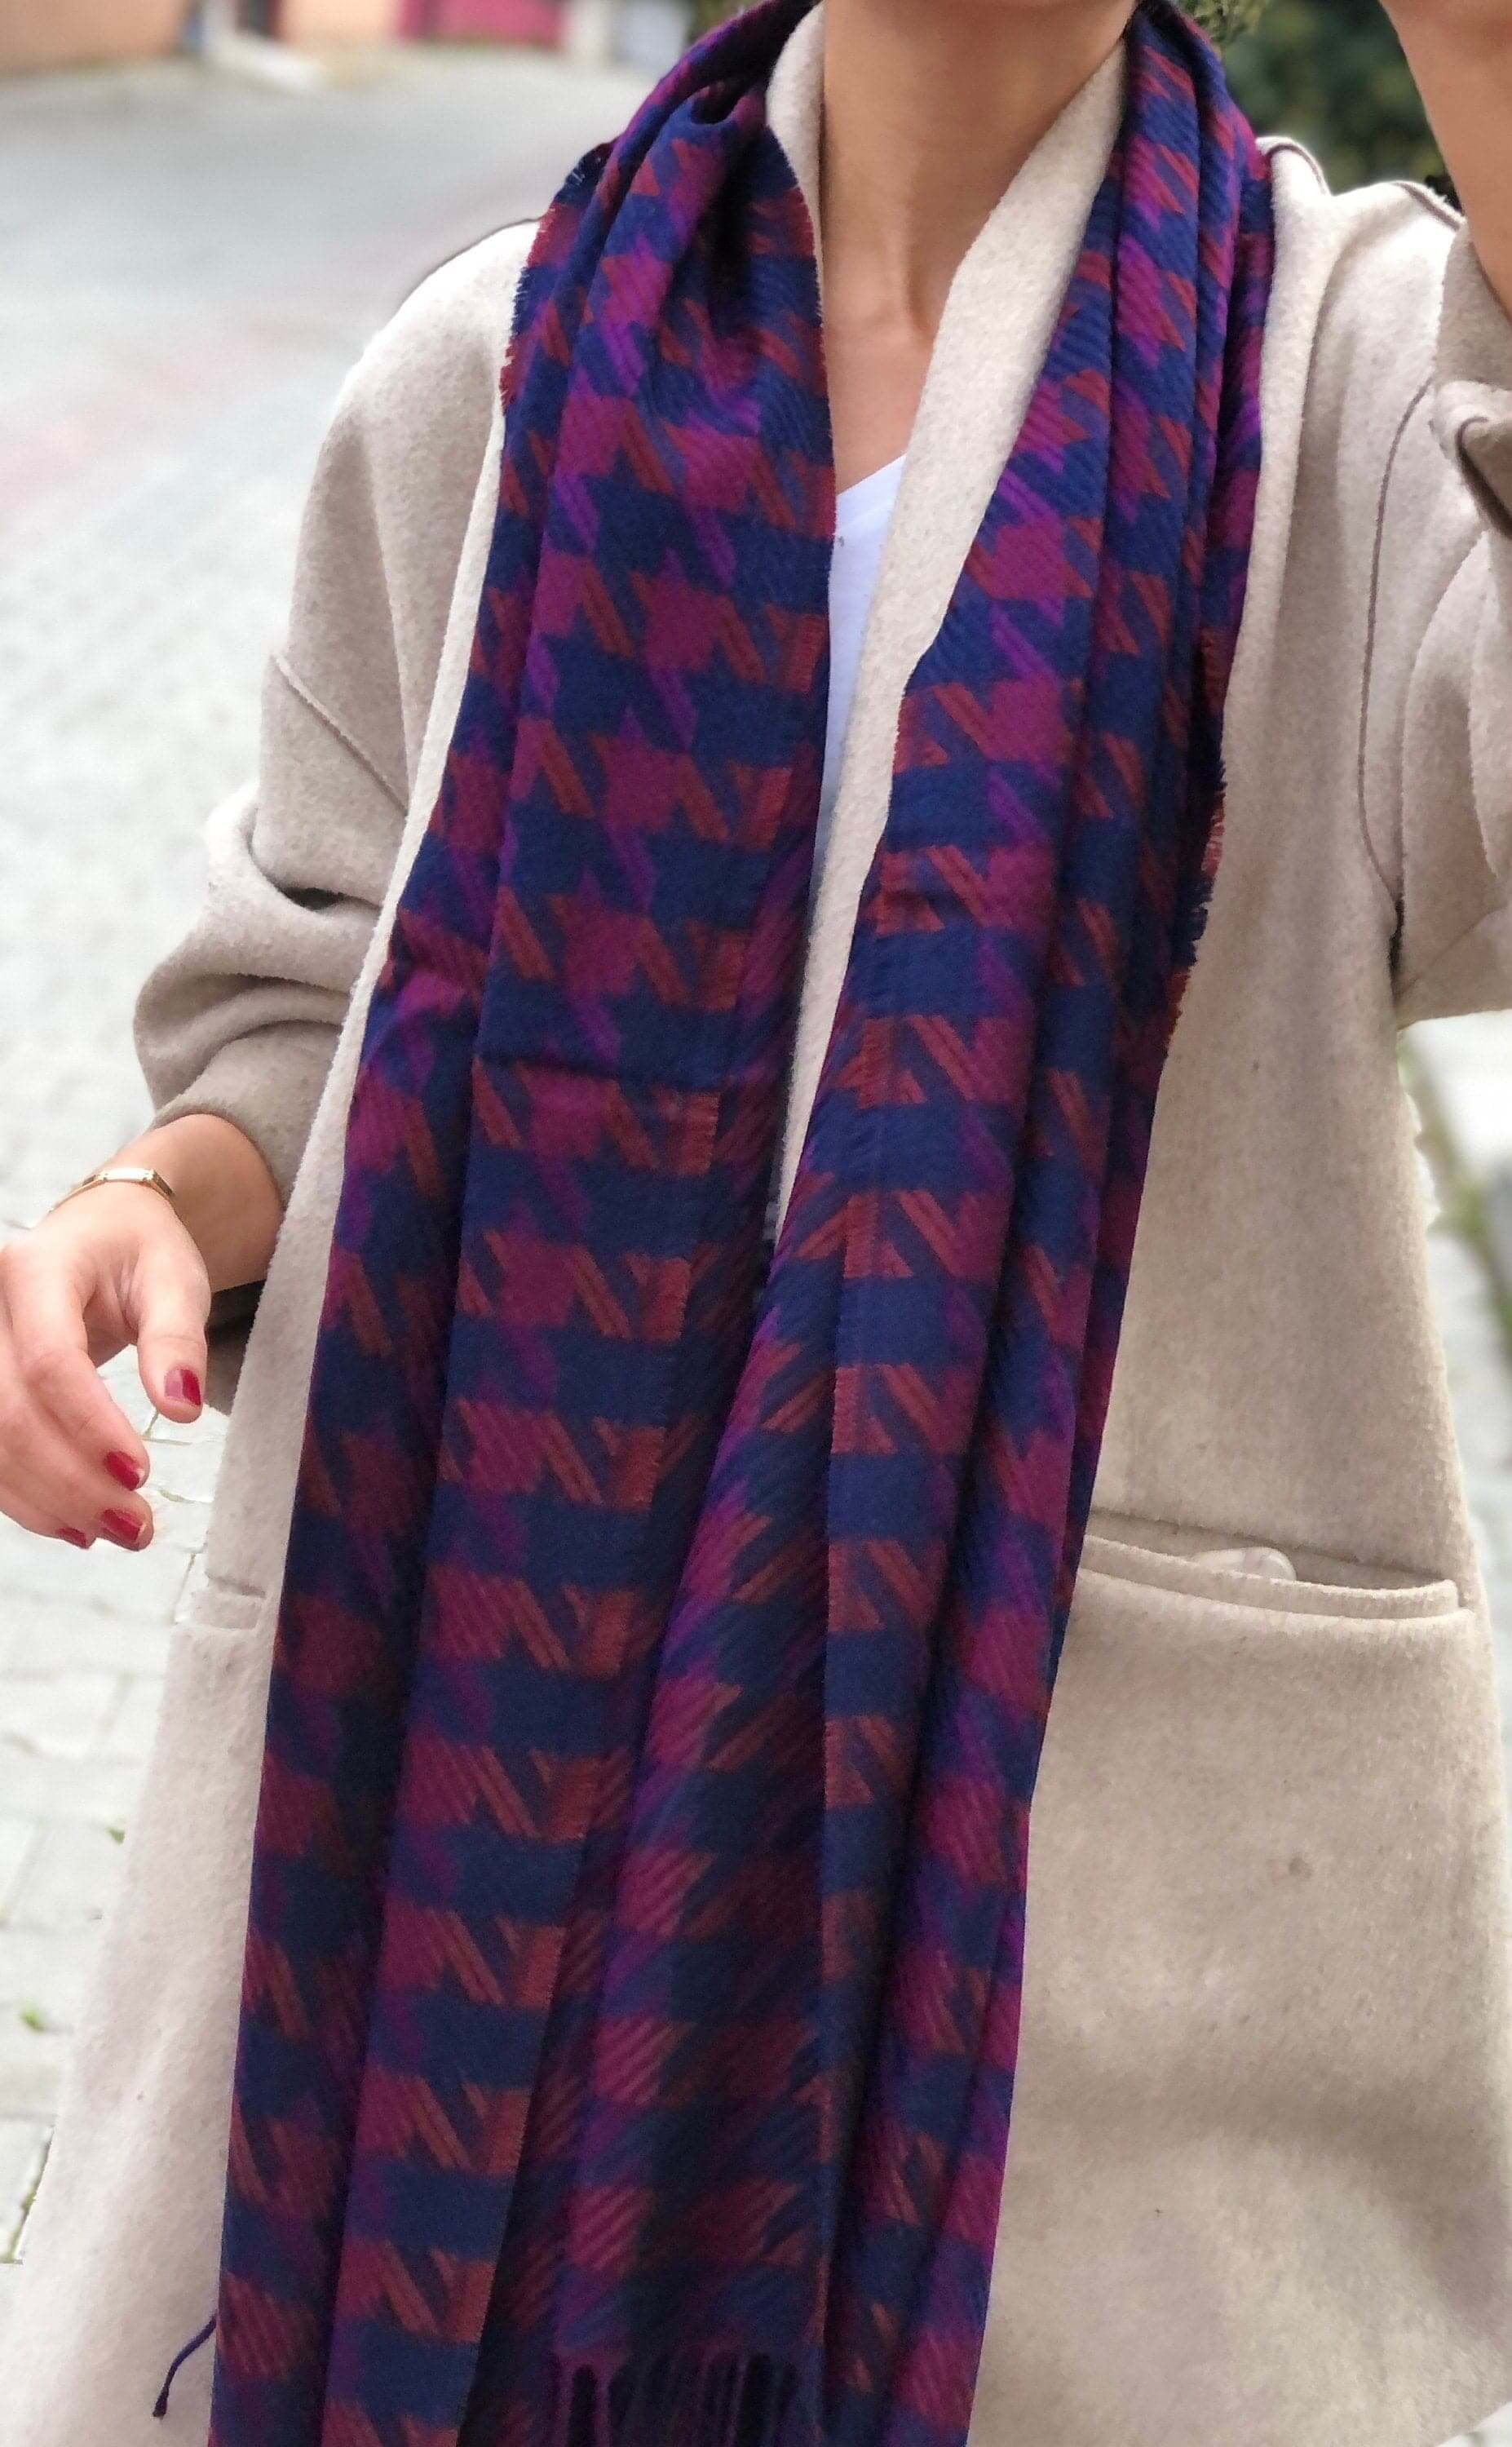 The perfect gift for any fashion-forward woman - a long and warm shawl made from wool and acrylic cotton, designed in a stylish goose foot pattern.